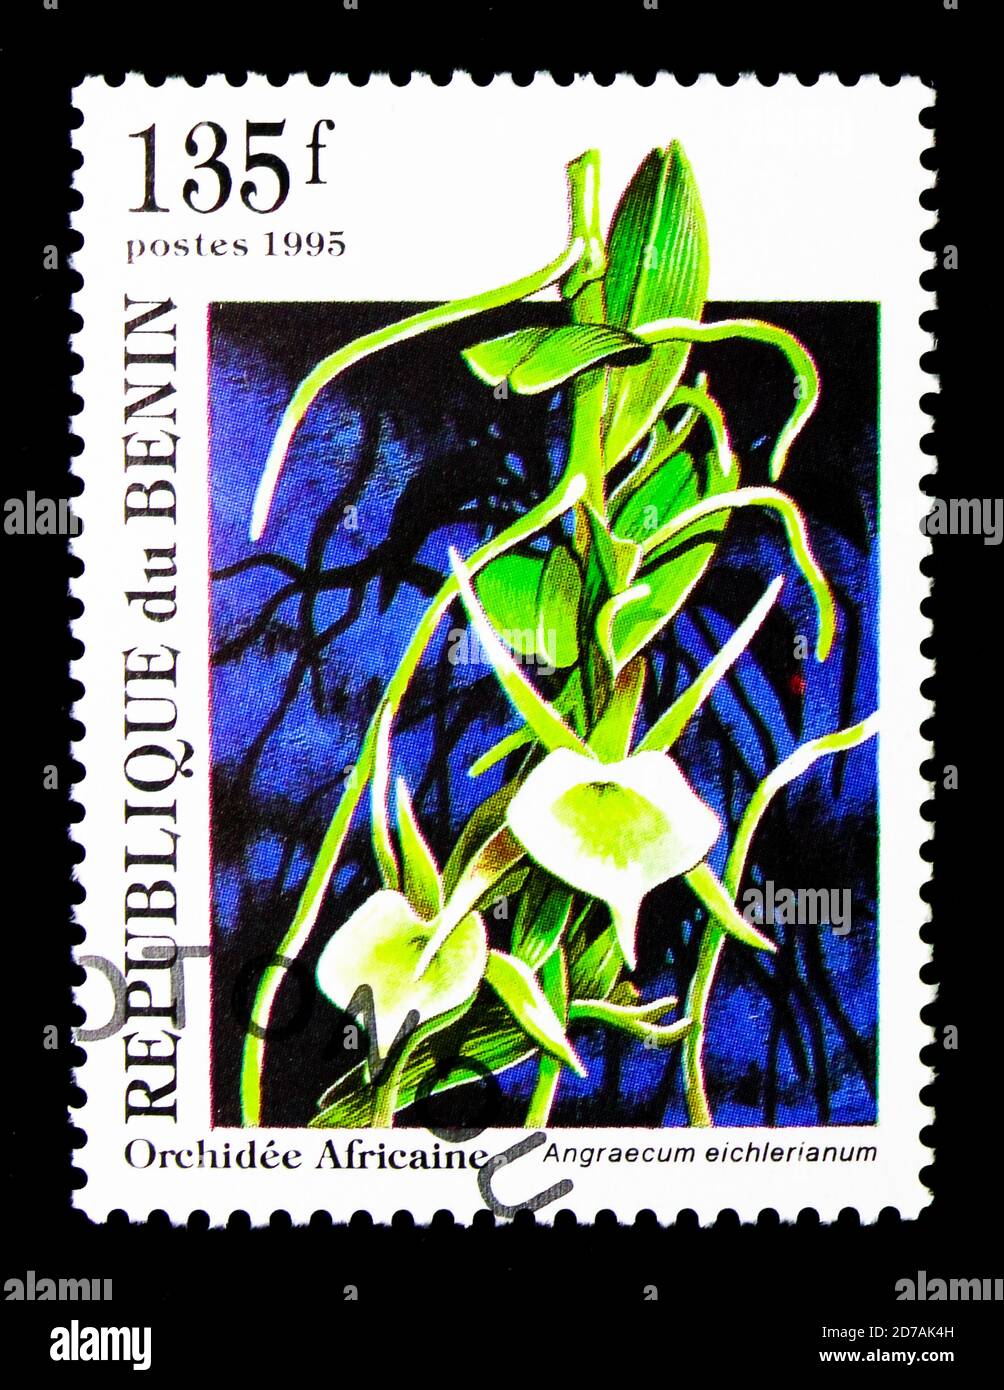 MOSCOW, RUSSIA - NOVEMBER 26, 2017: A stamp printed in Benin shows Angraecum eichlerianum, African Orchids serie, circa 1995 Stock Photo